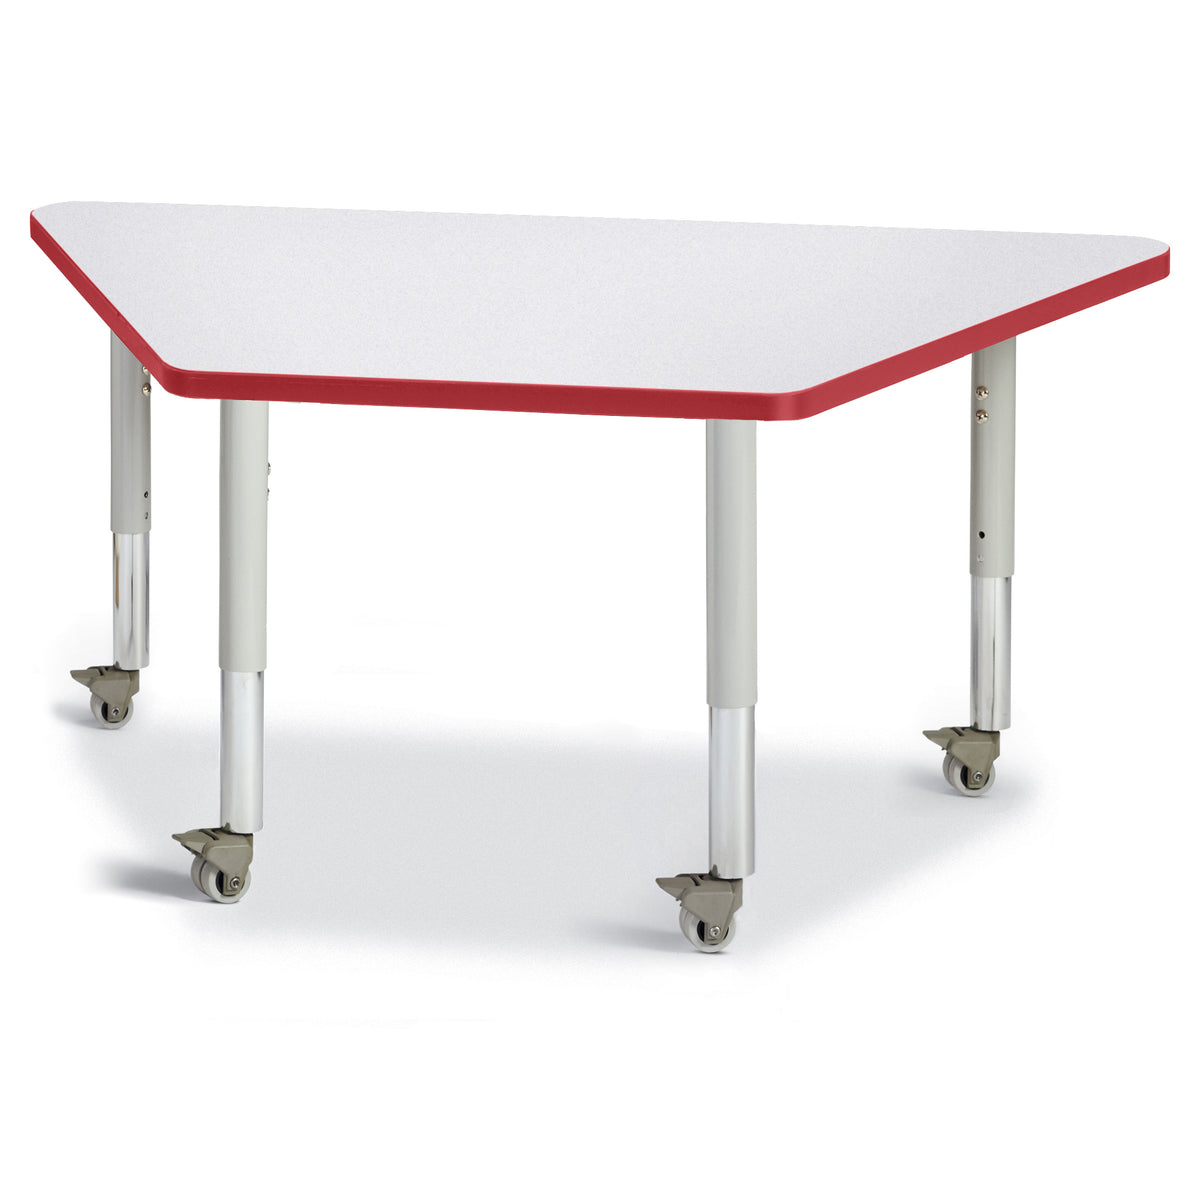 6438JCM008, Berries Trapezoid Activity Tables - 24" X 48", Mobile - Freckled Gray/Red/Gray